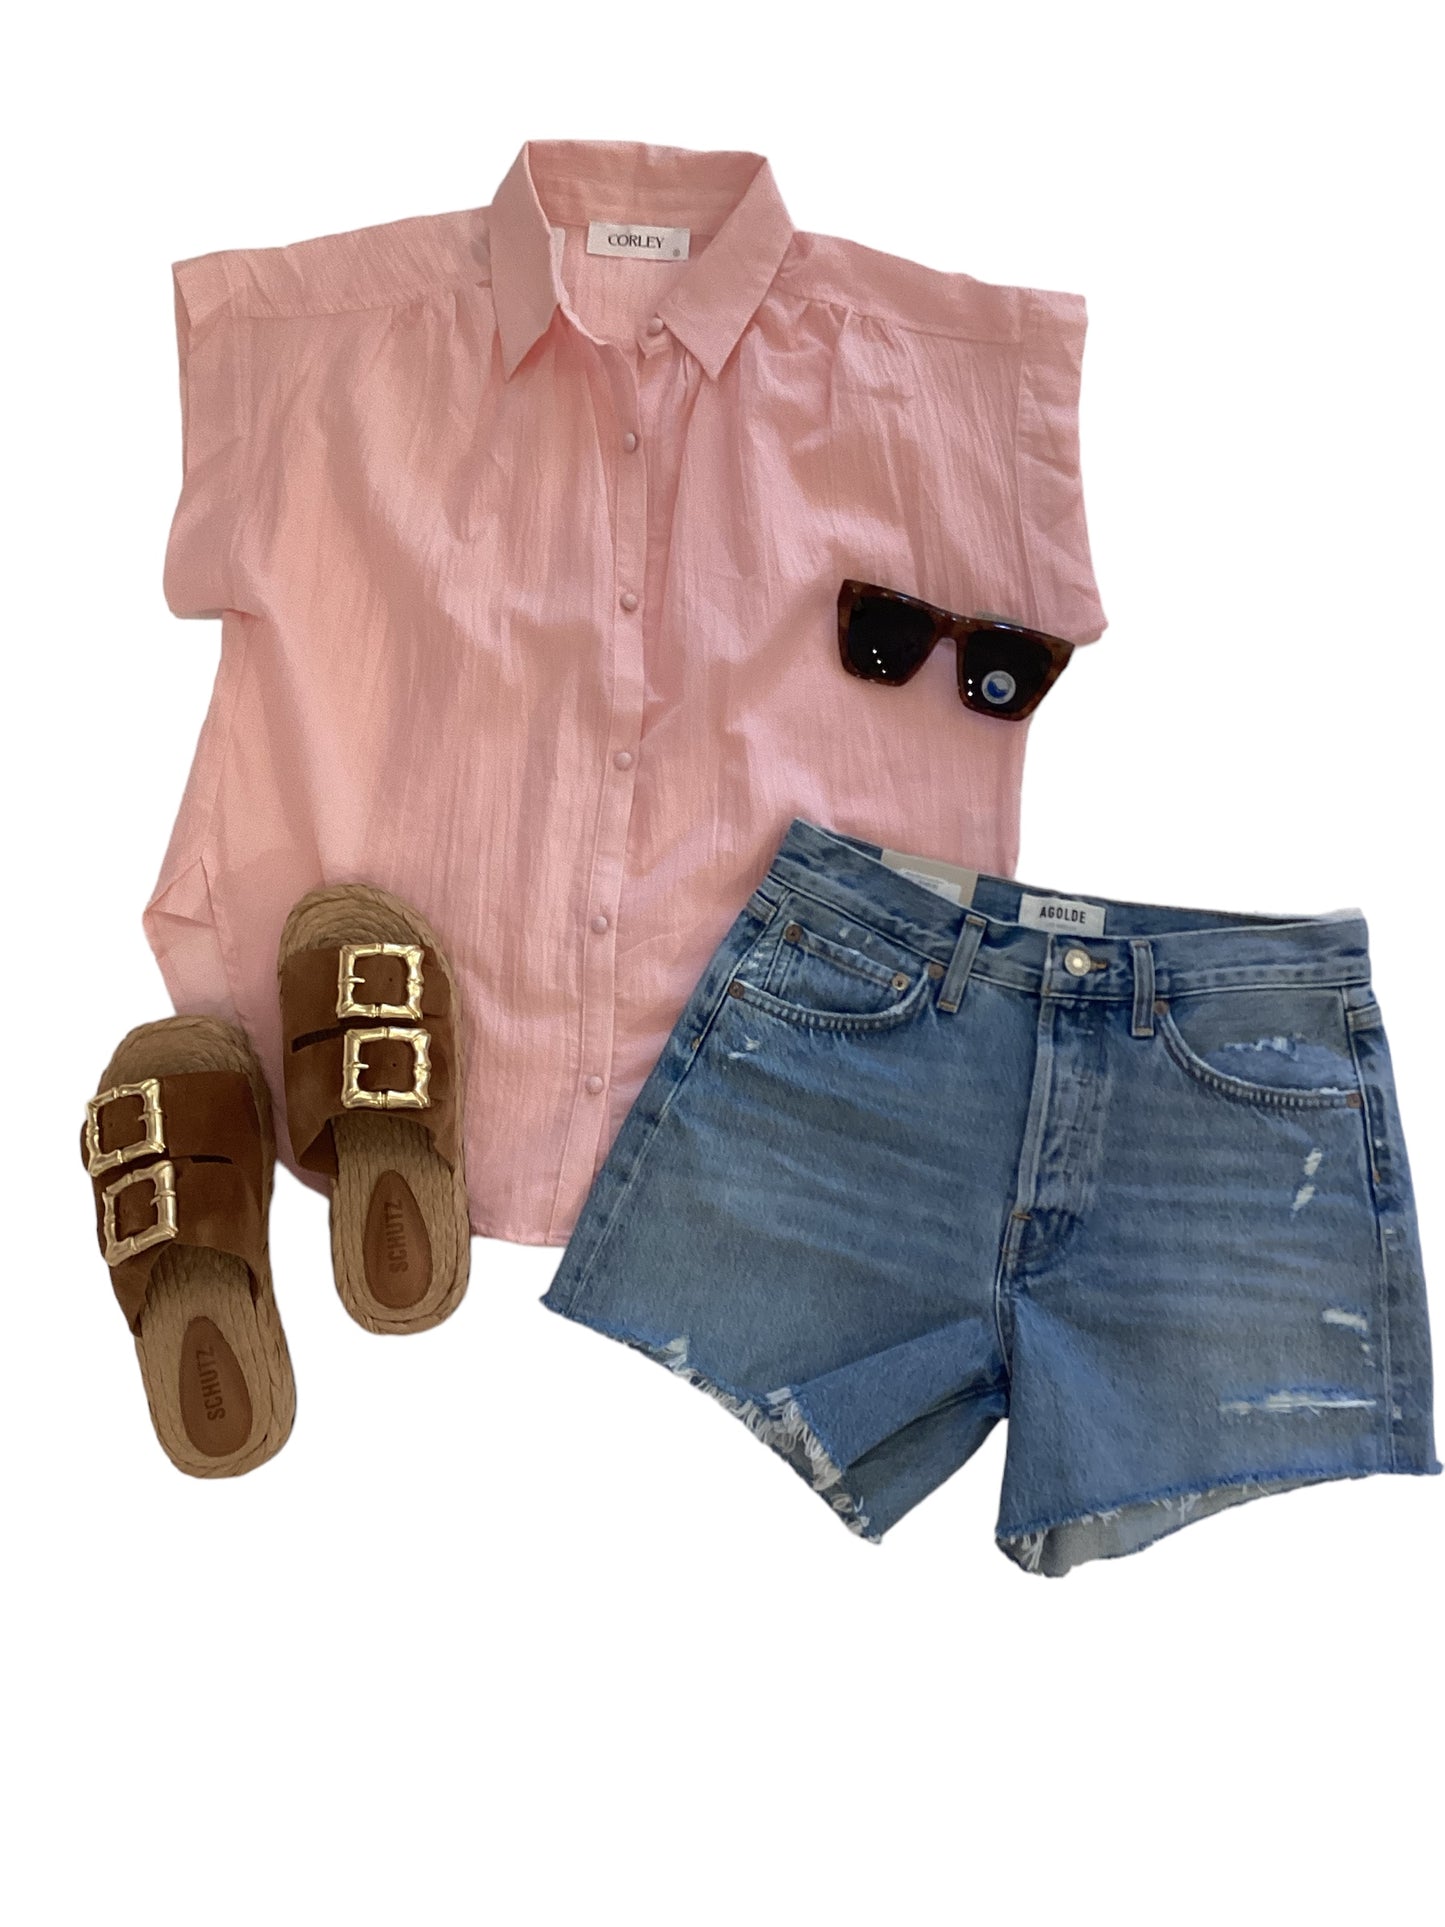 The Blakely Button Up Top